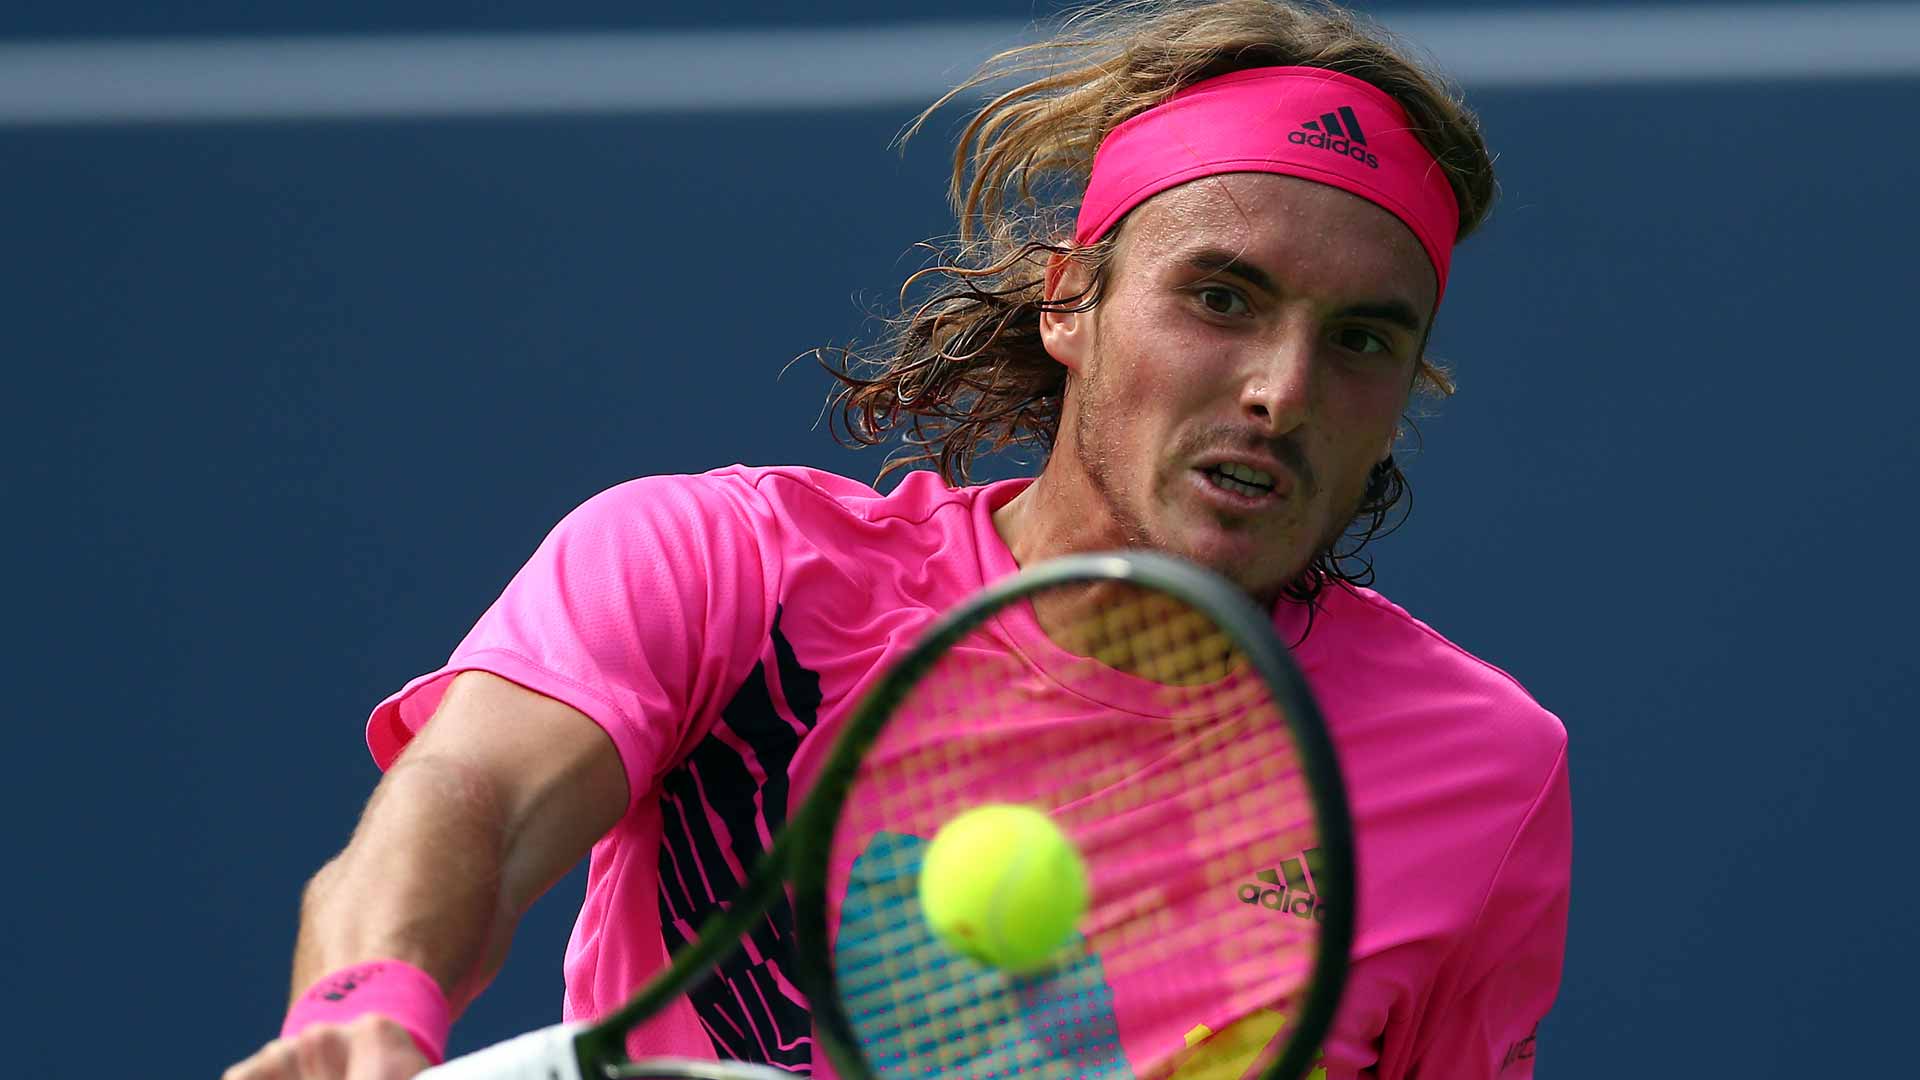 Stefanos Tsitsipas at the 2018 ATP Masters 1000 event in Toronto.